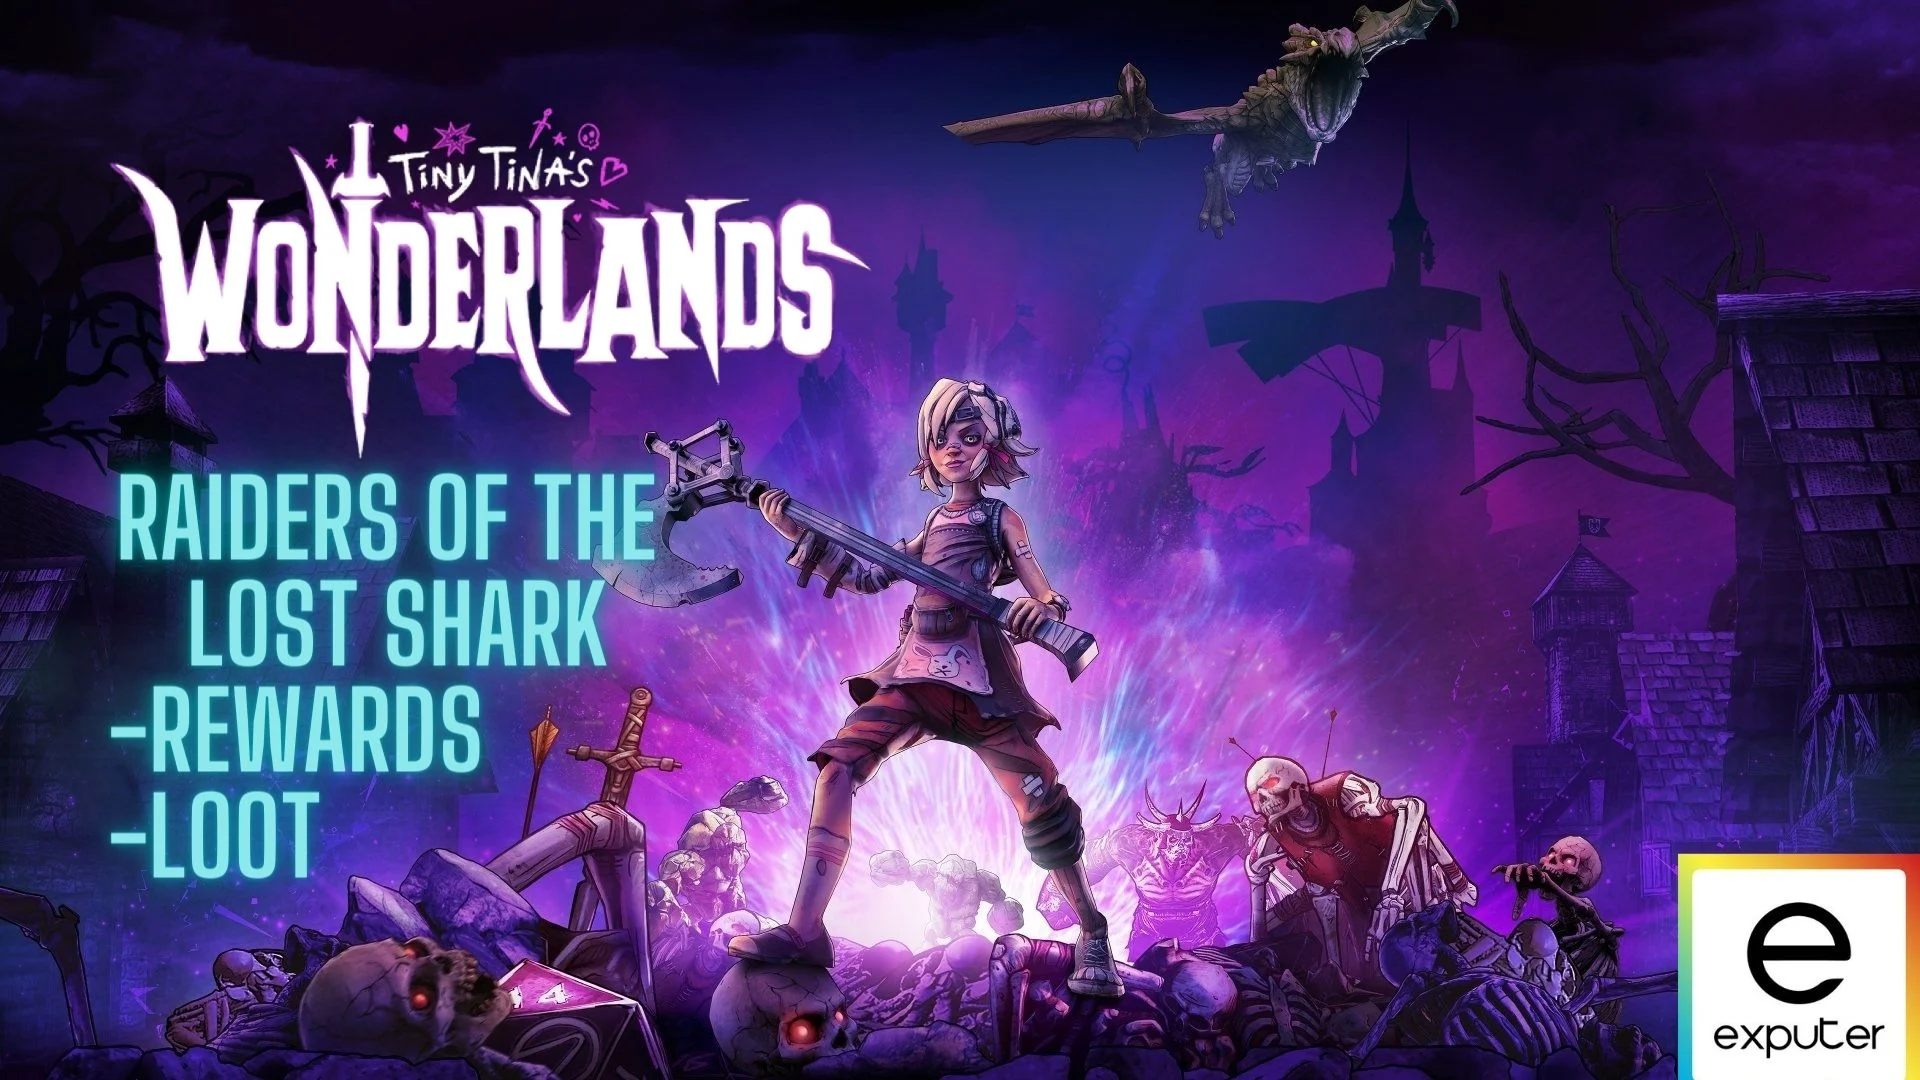 Tiny Tina Wonderlands Riader of the Lost Shark quest with good reward.